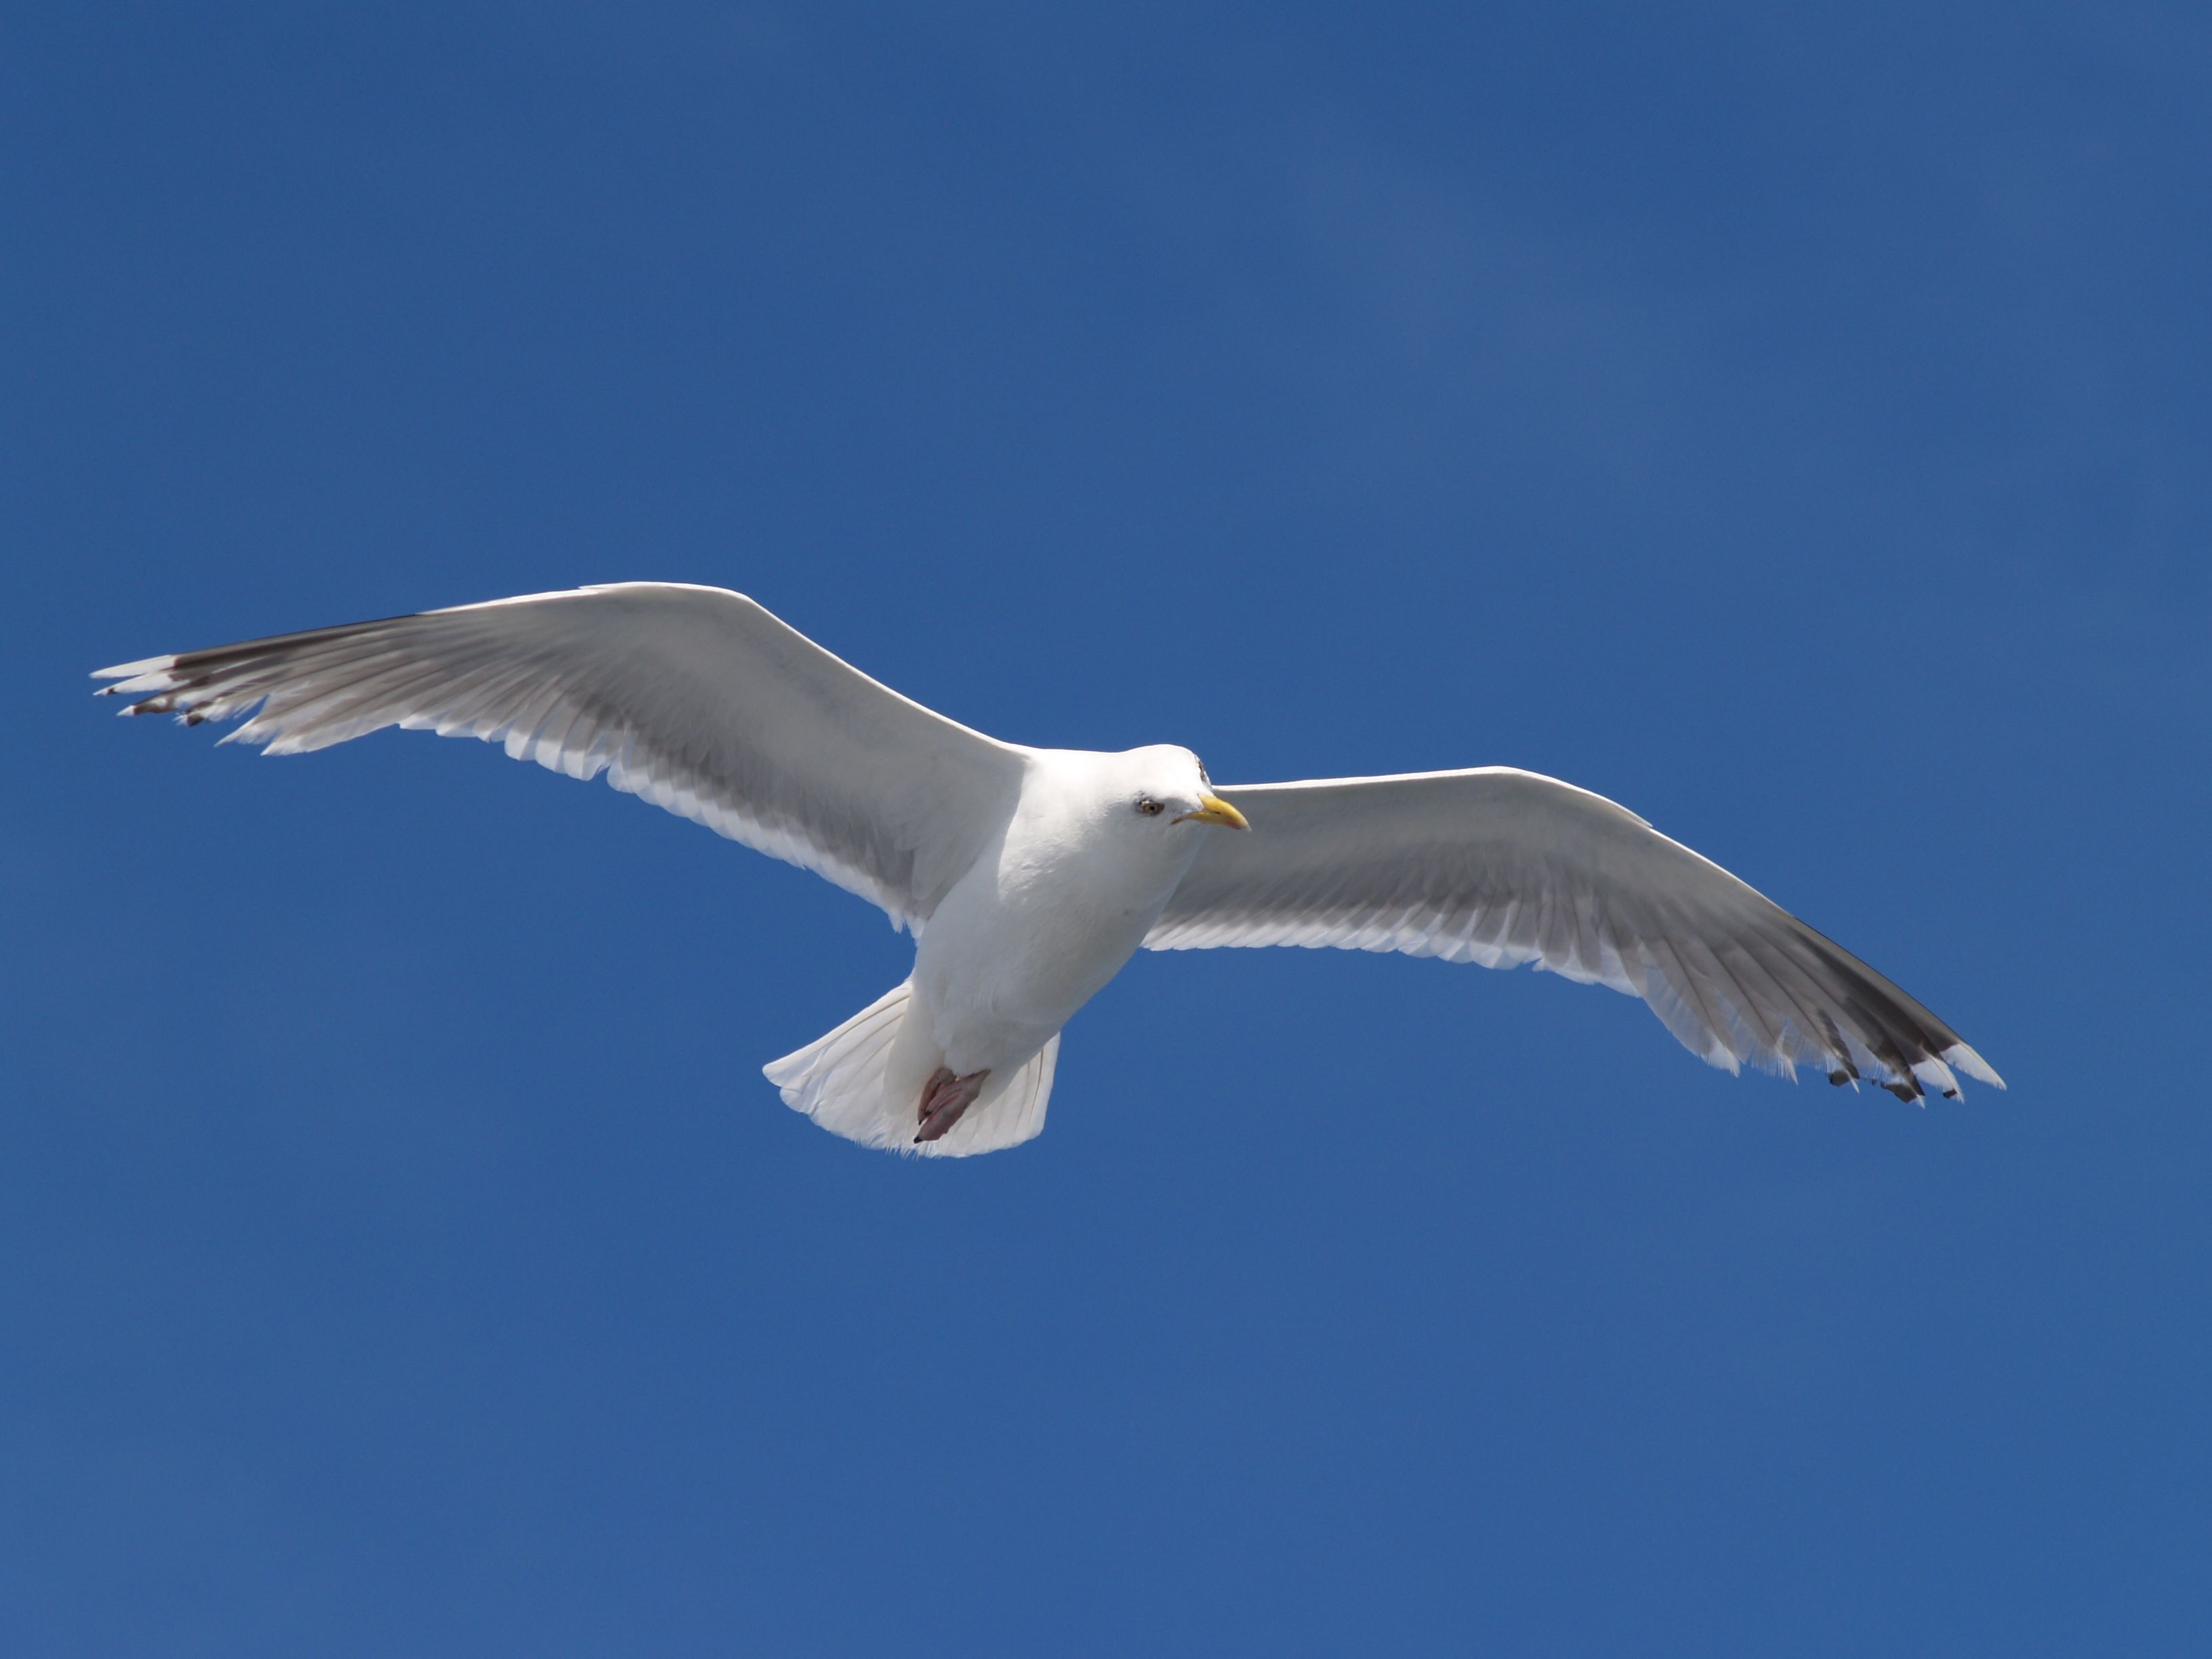 seagull - The call they make (sound) | Oceans | Pinterest | Bird